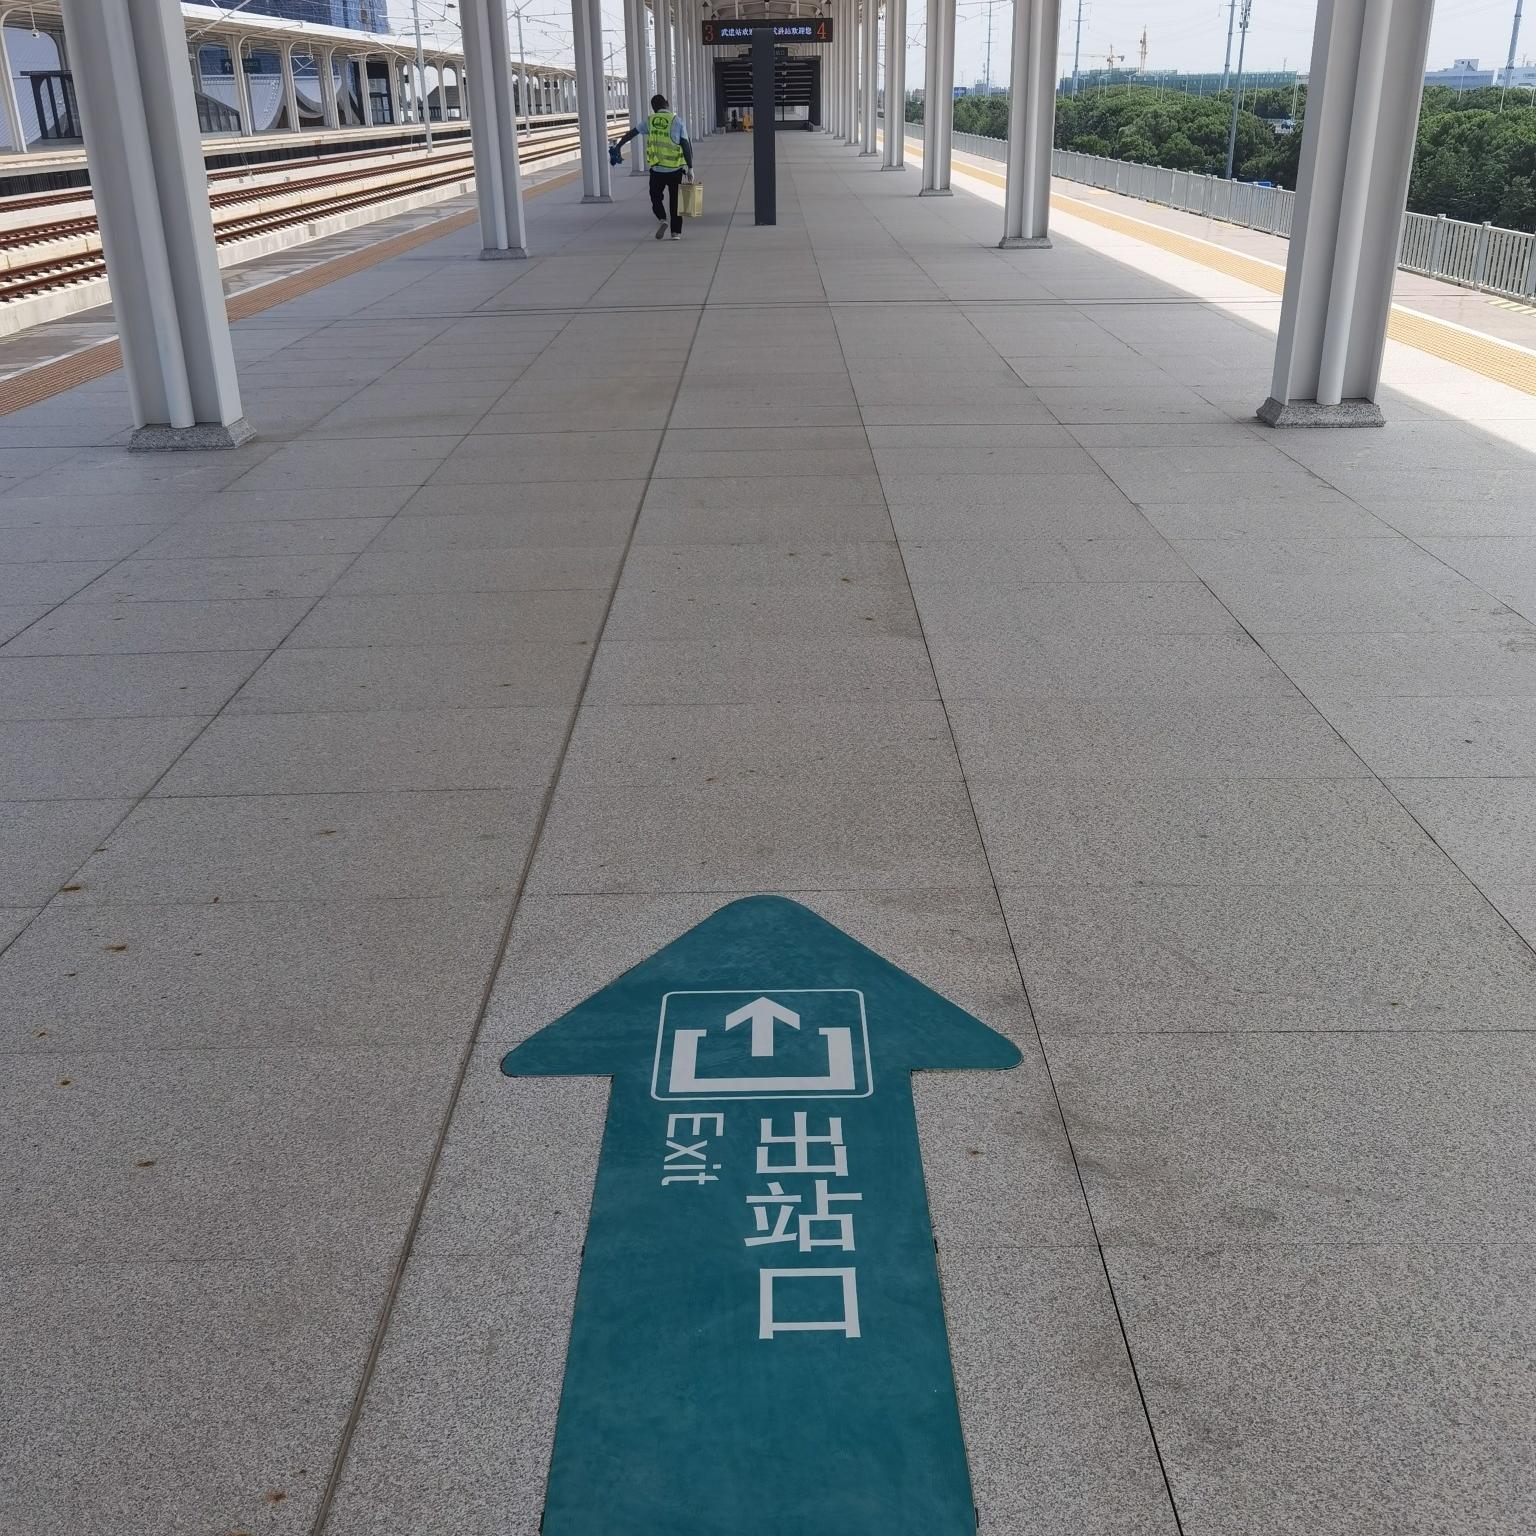 [Case] Construction of ground guidance signs at Wujin Station in Changzhou, Jiangsu Province—preformed floor stickers ​